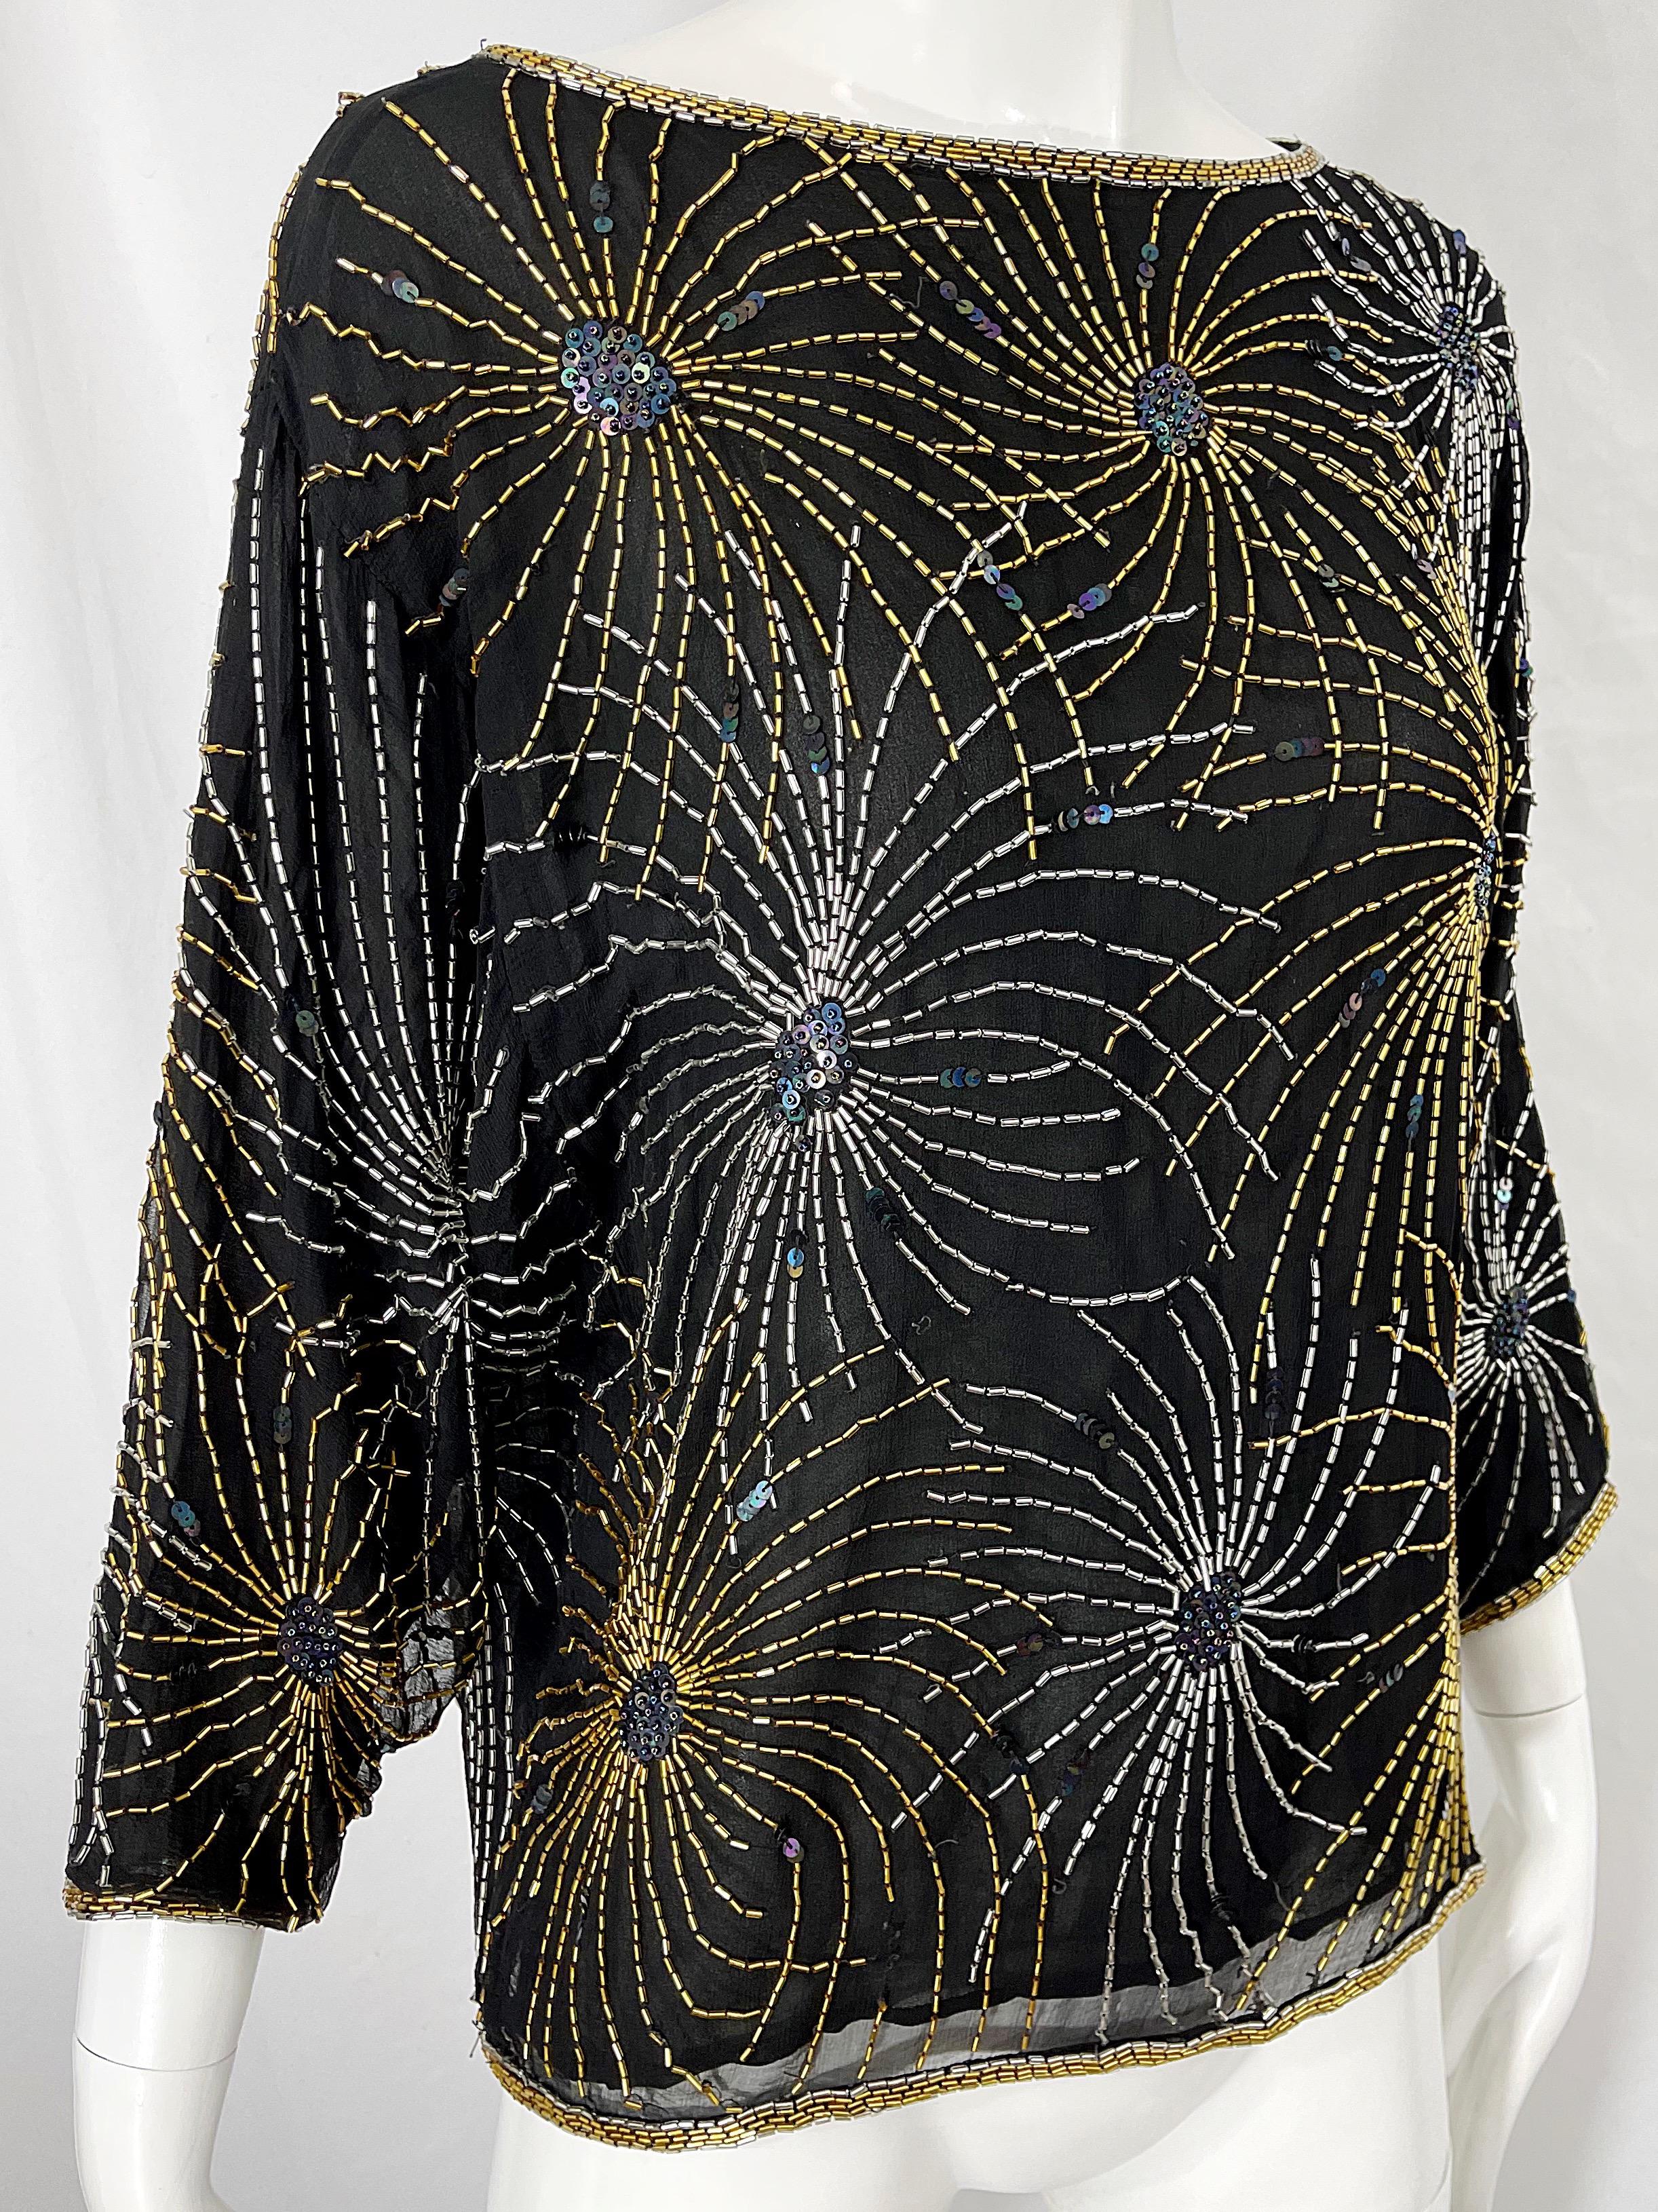 Halston 1970s Iconic Fireworks Beaded Black Silk Chiffon Vintage 70s Blouse Top For Sale 1